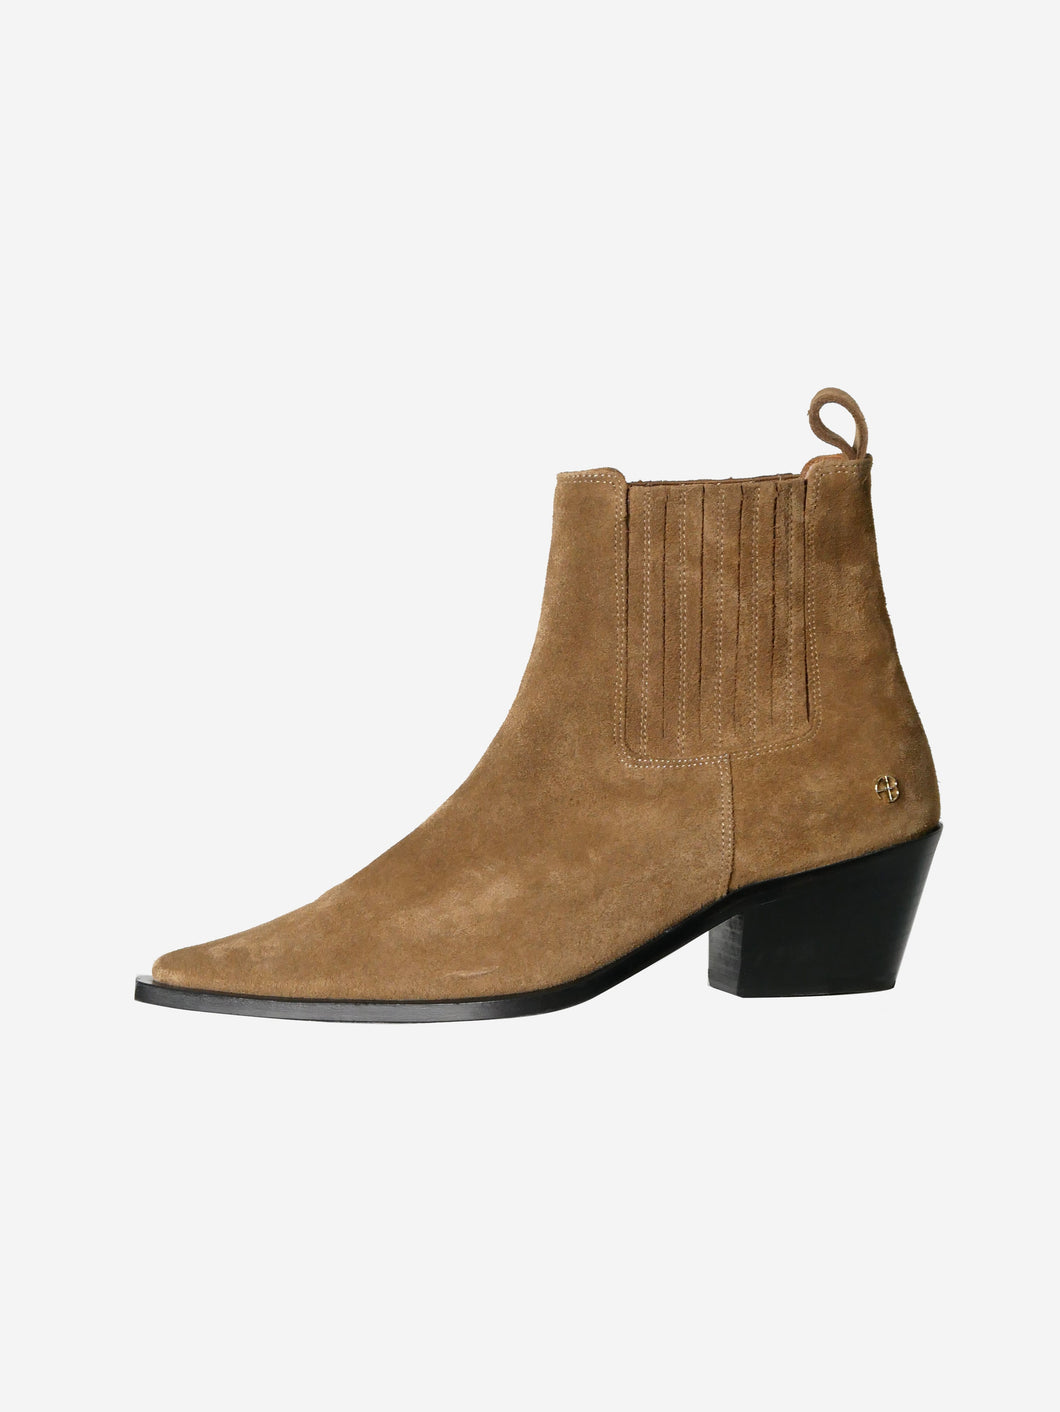 Brown suede ankle boots - size EU 38 Boots Anine Bing 